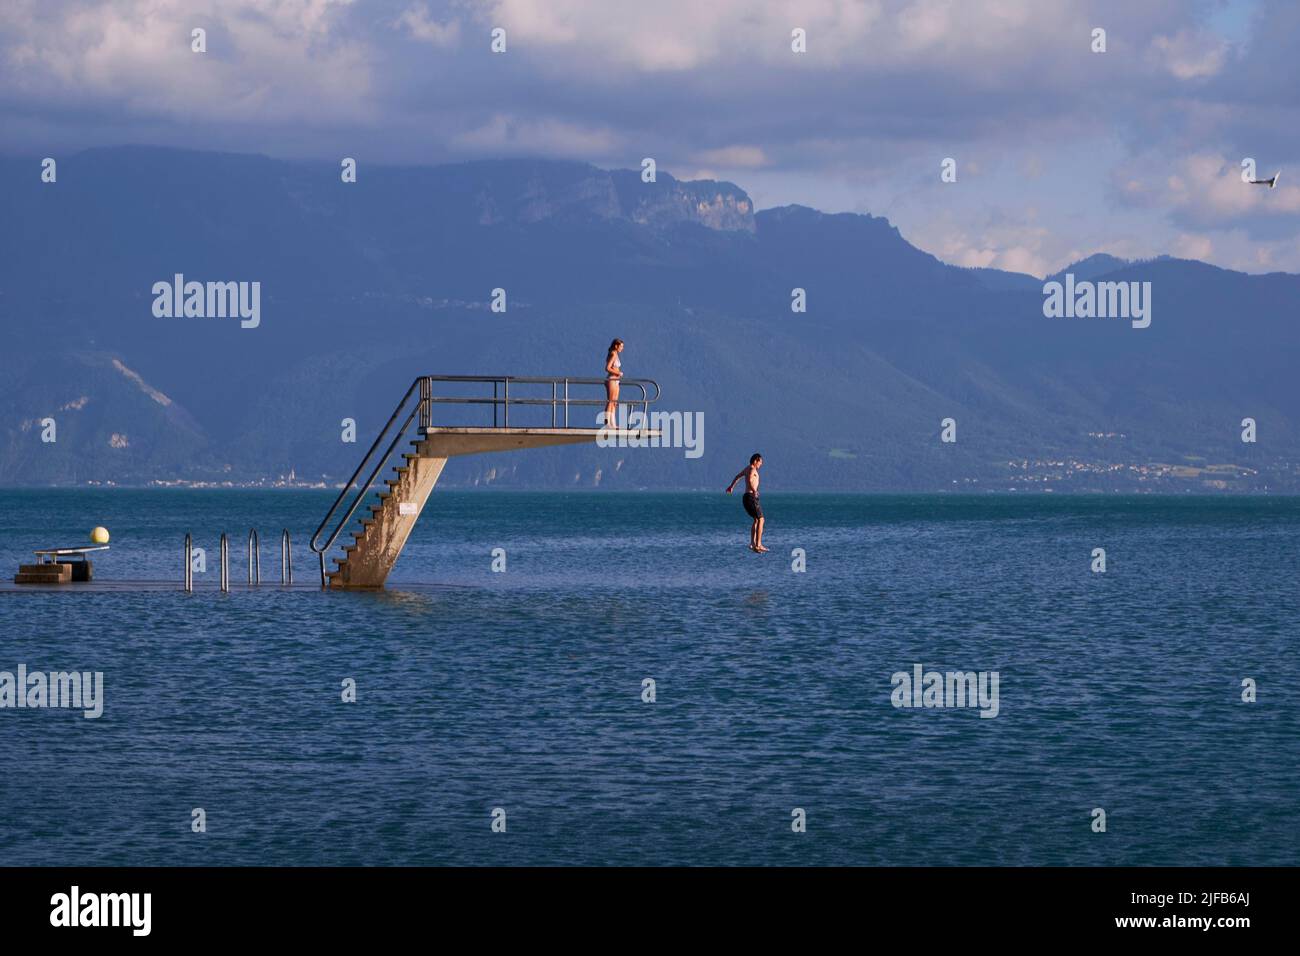 Switzerland, Canton of Vaud, Lutry, the diving board of the beach on the Geneva lake Stock Photo